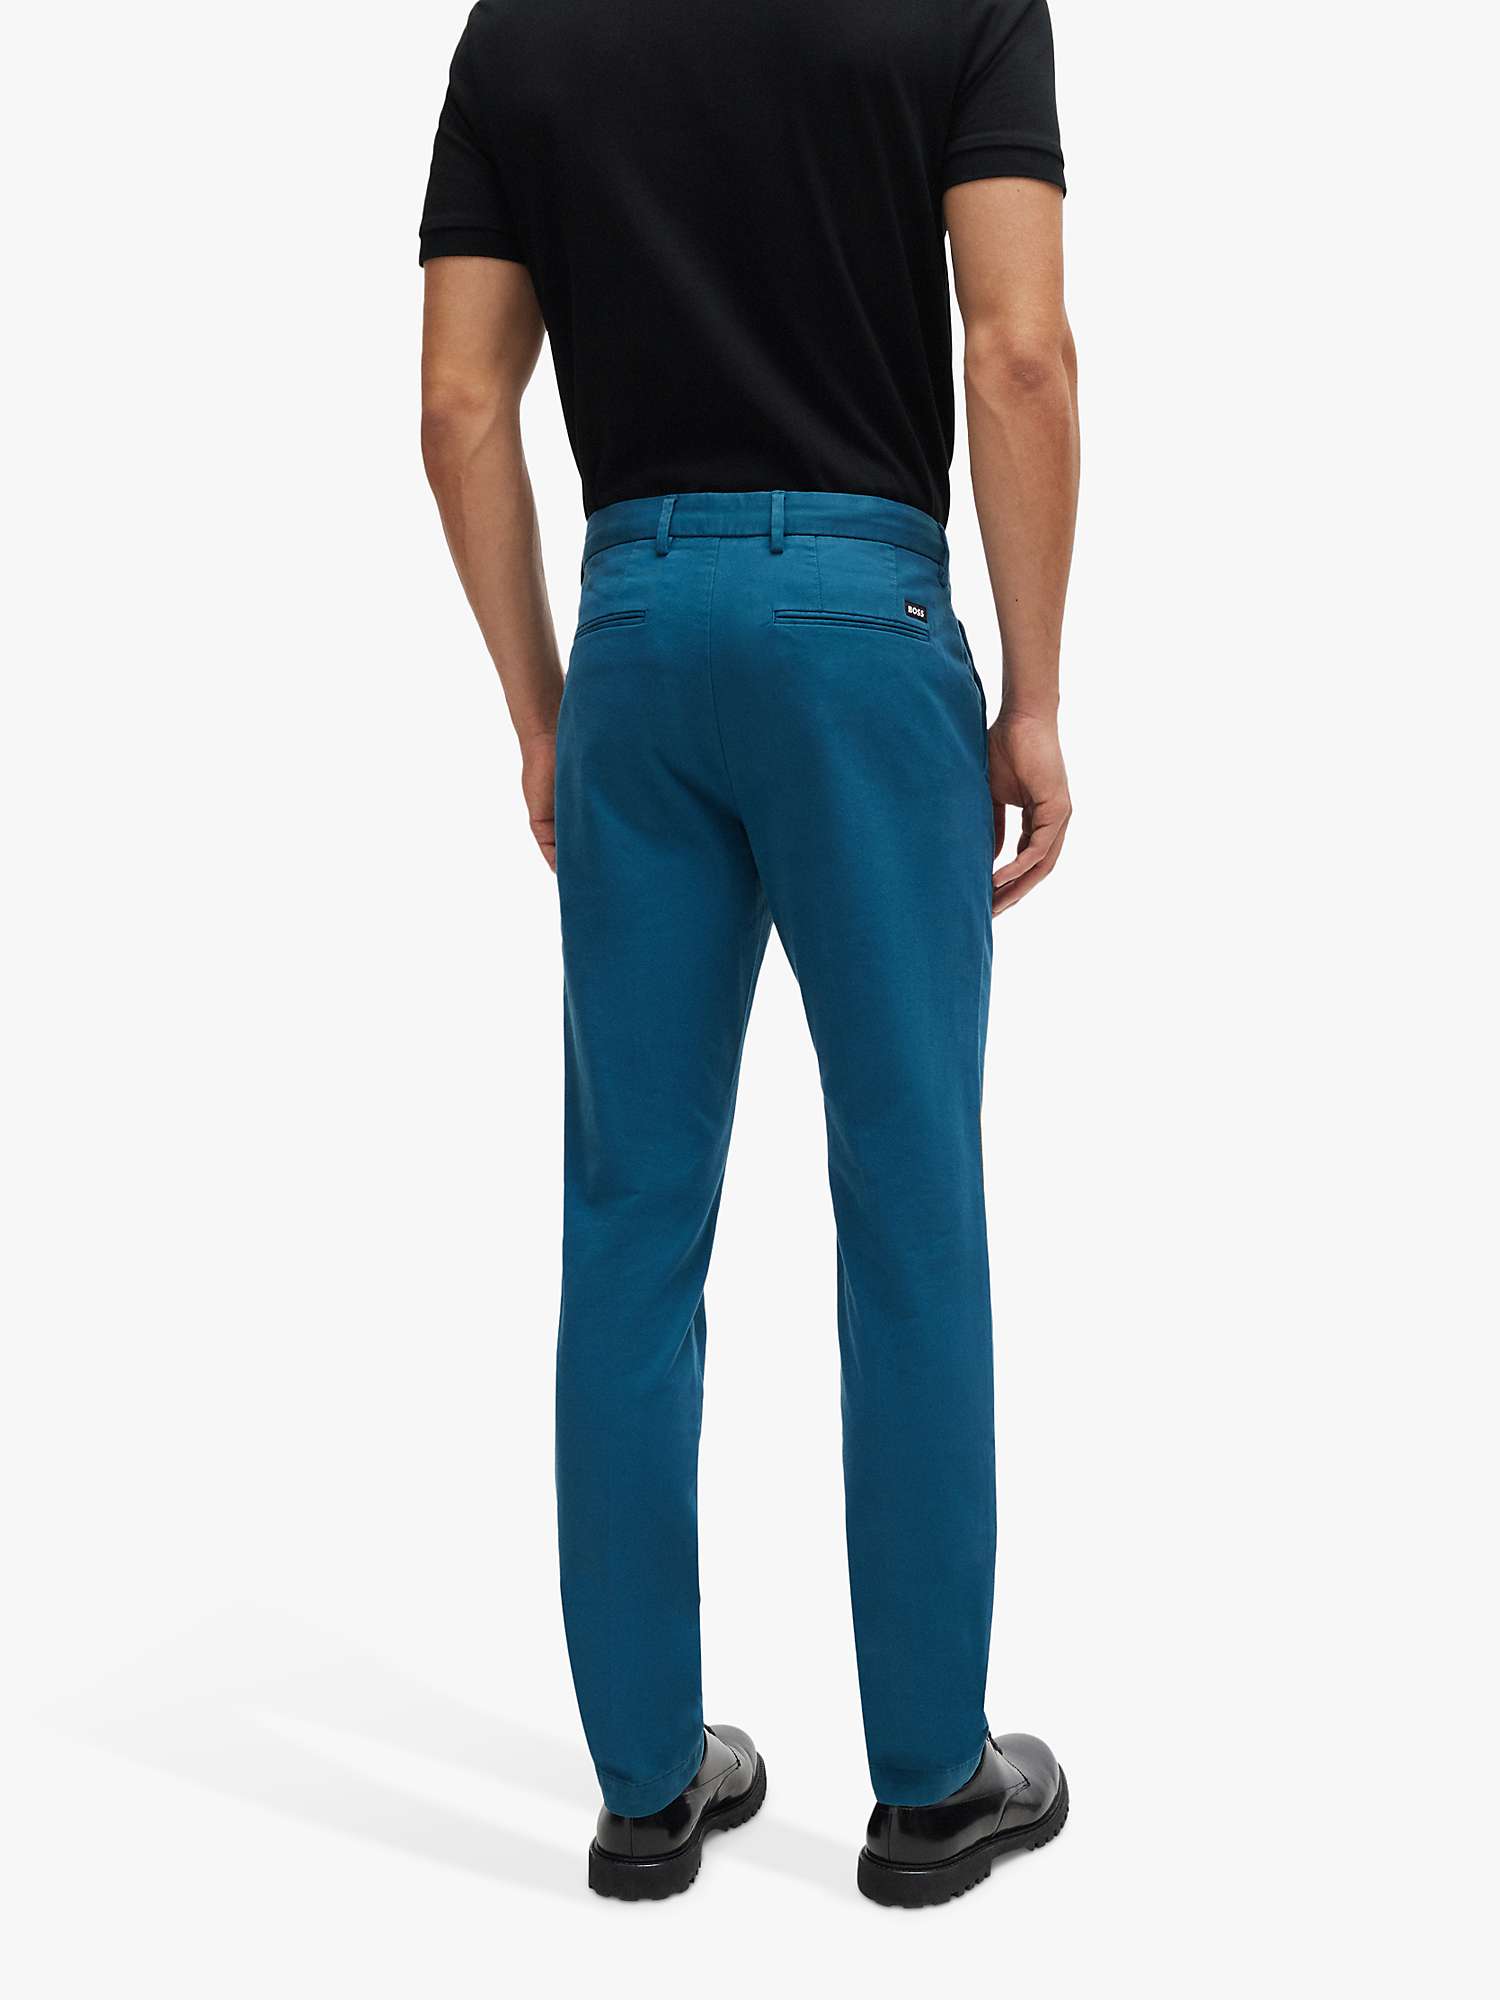 Buy BOSS Kaito Slim Fit Trousers Online at johnlewis.com